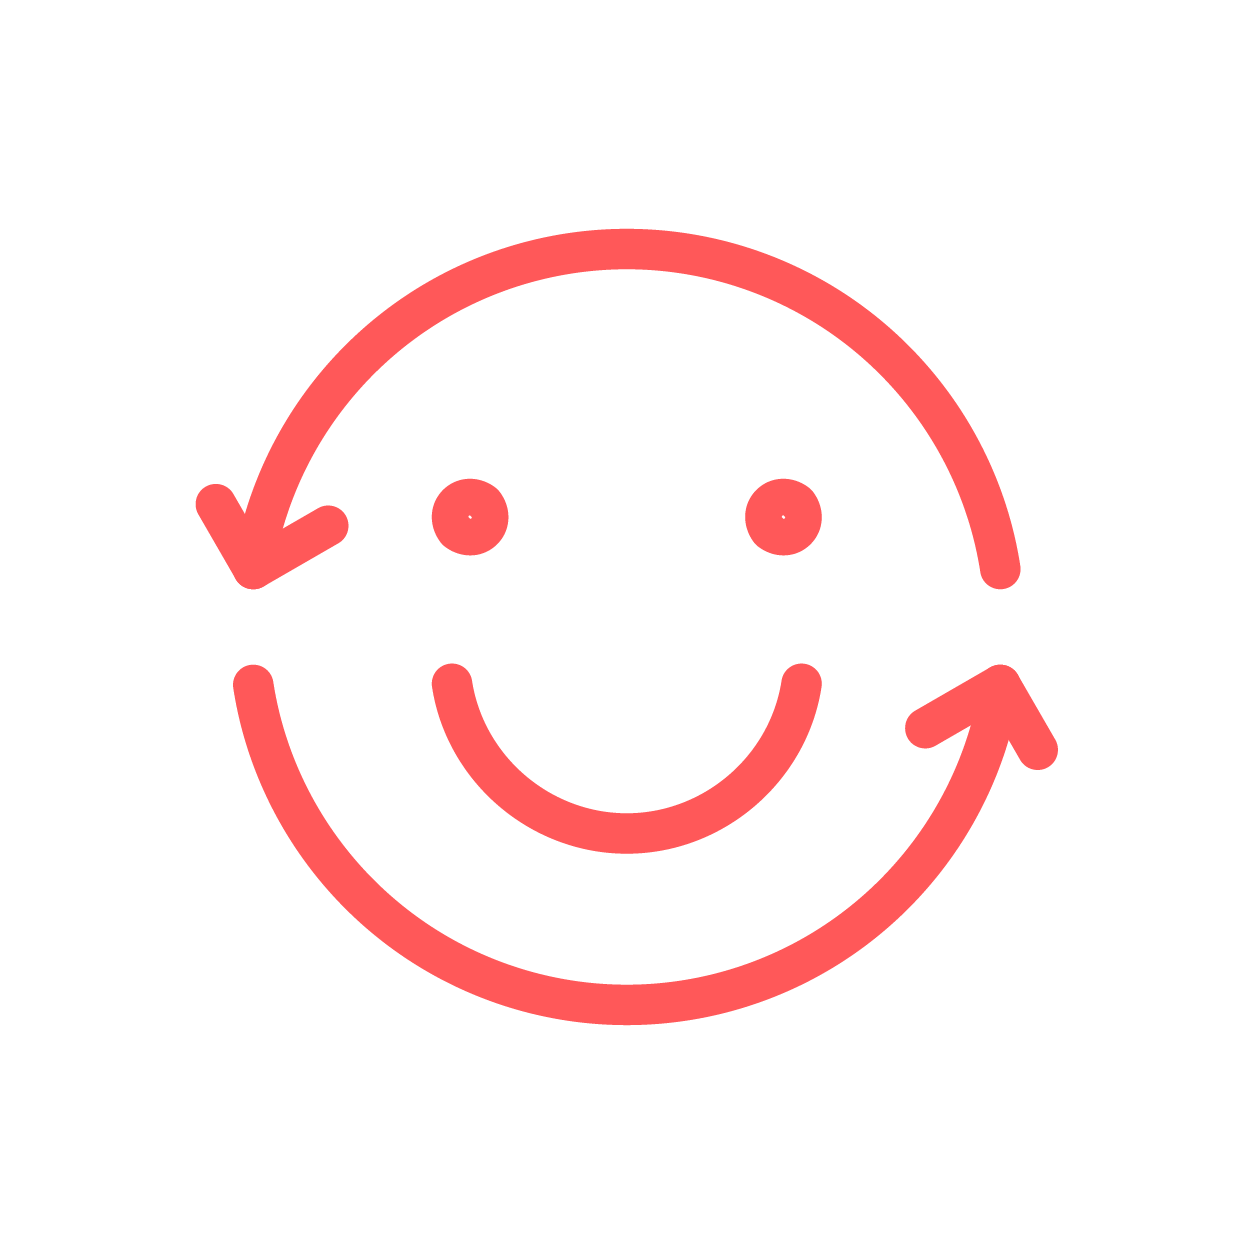 A smiley face with two arrows pointing in a circular direction to represent comfort.